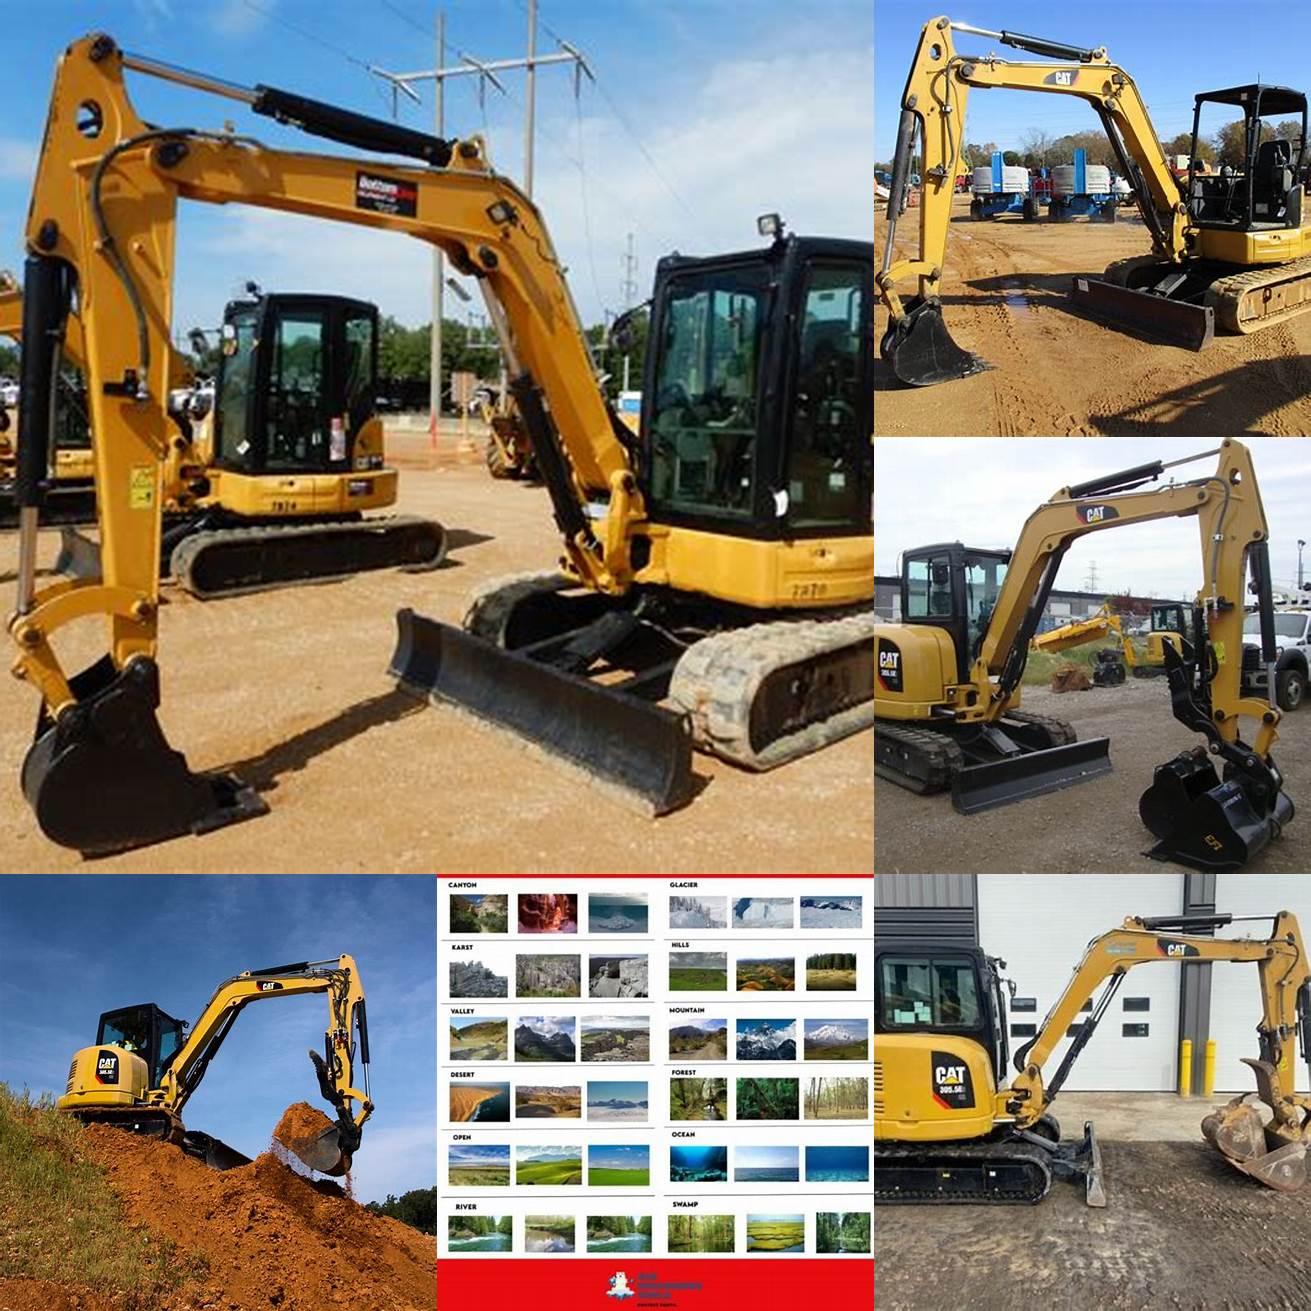 The Cat 305 on different types of terrain